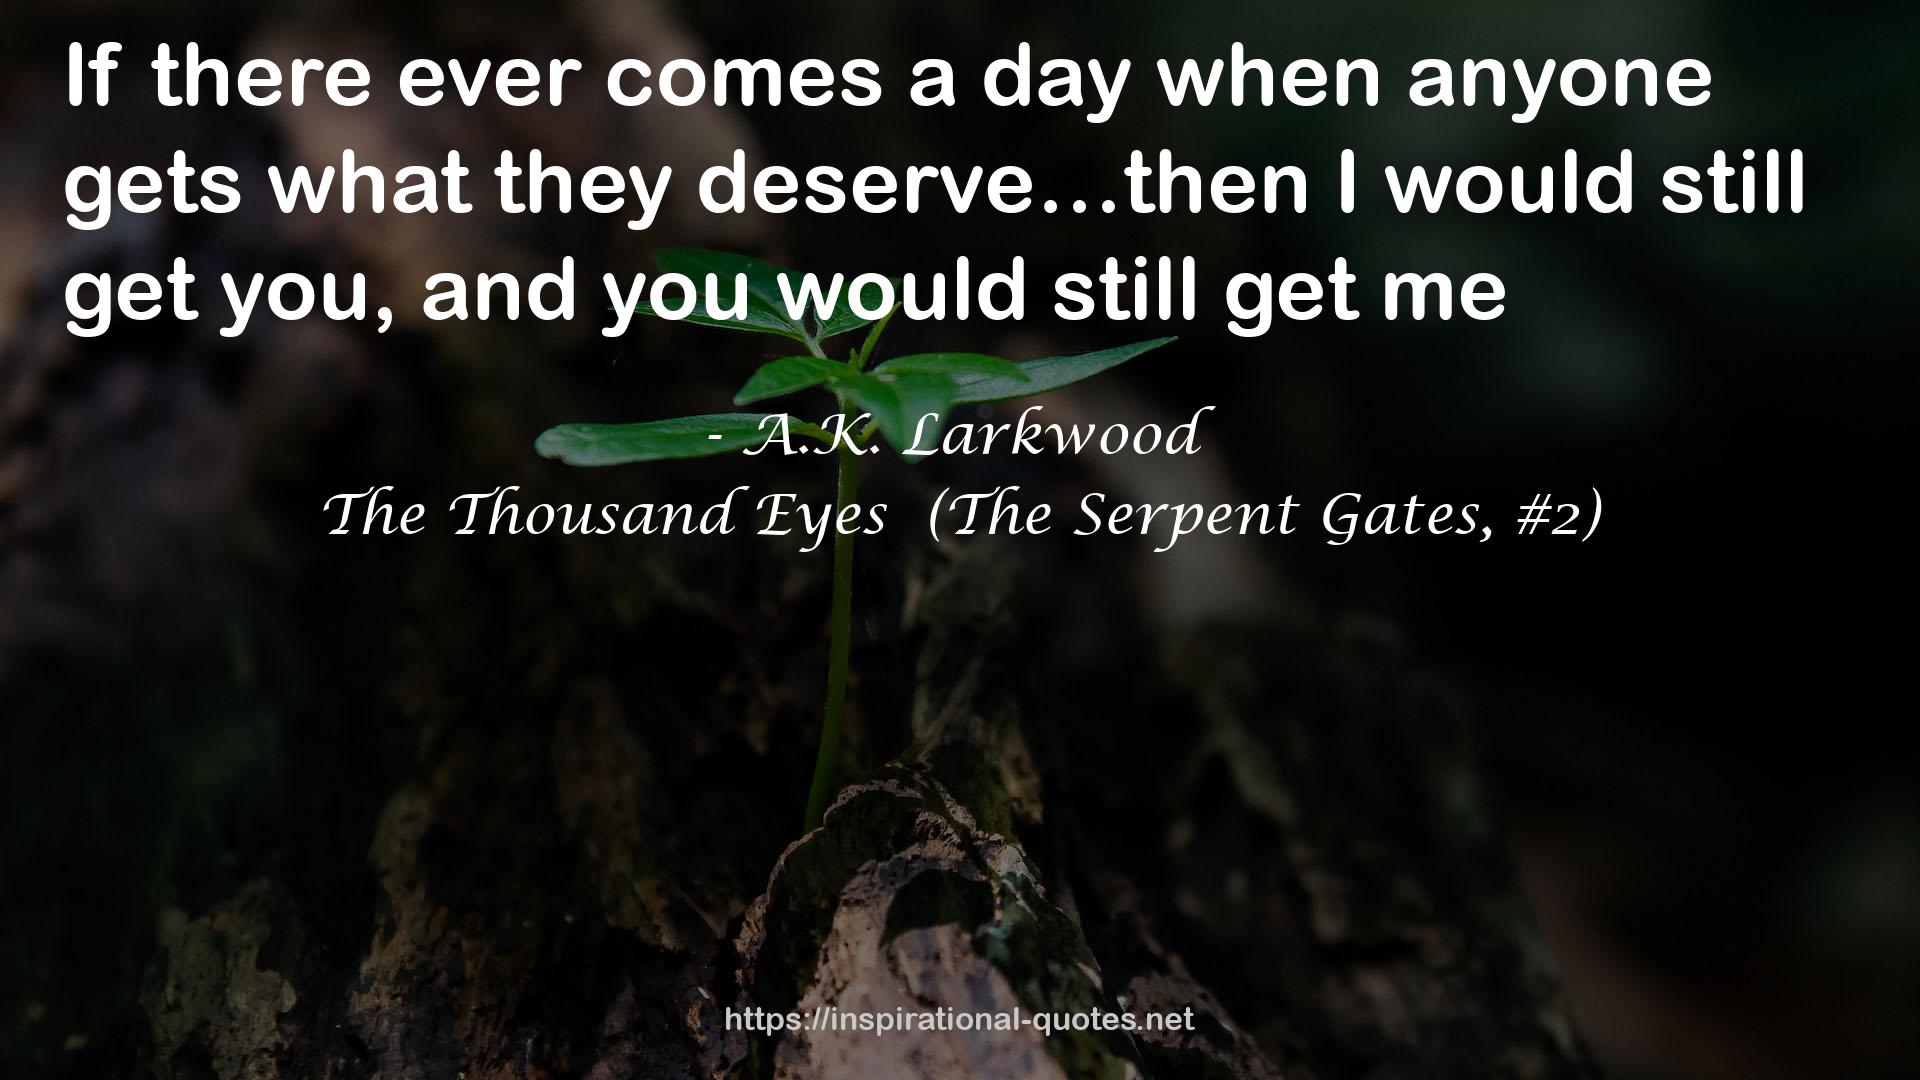 The Thousand Eyes  (The Serpent Gates, #2) QUOTES